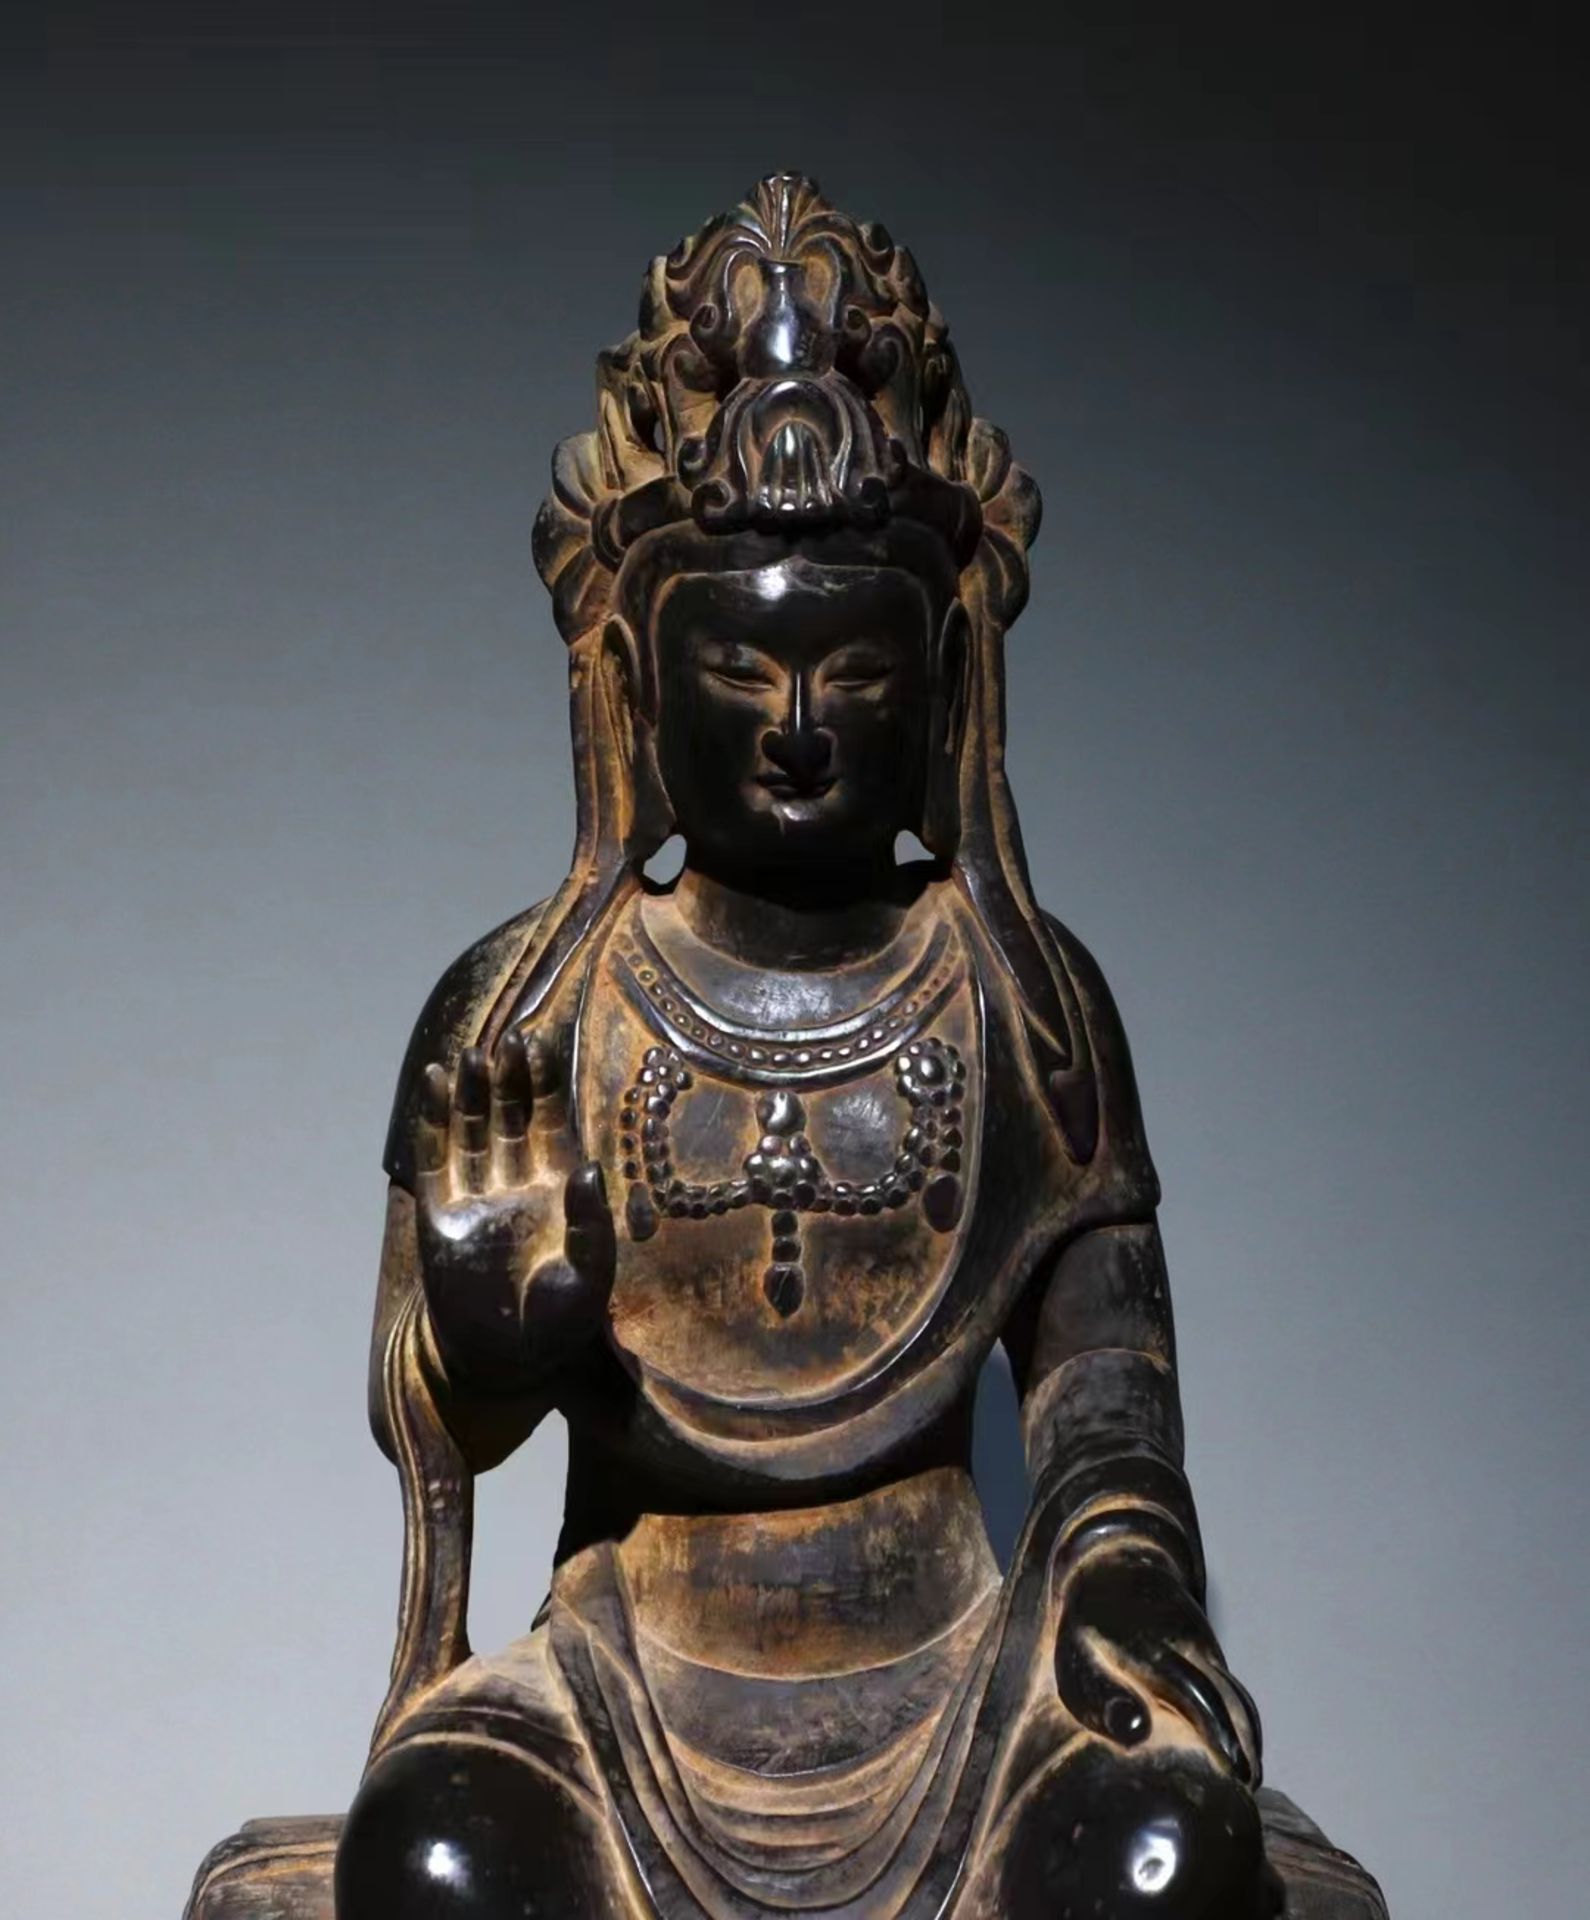 A Chinese stone sculpture, 14TH Century earlier Pr. Collection of NARA private gallary. - Image 4 of 8